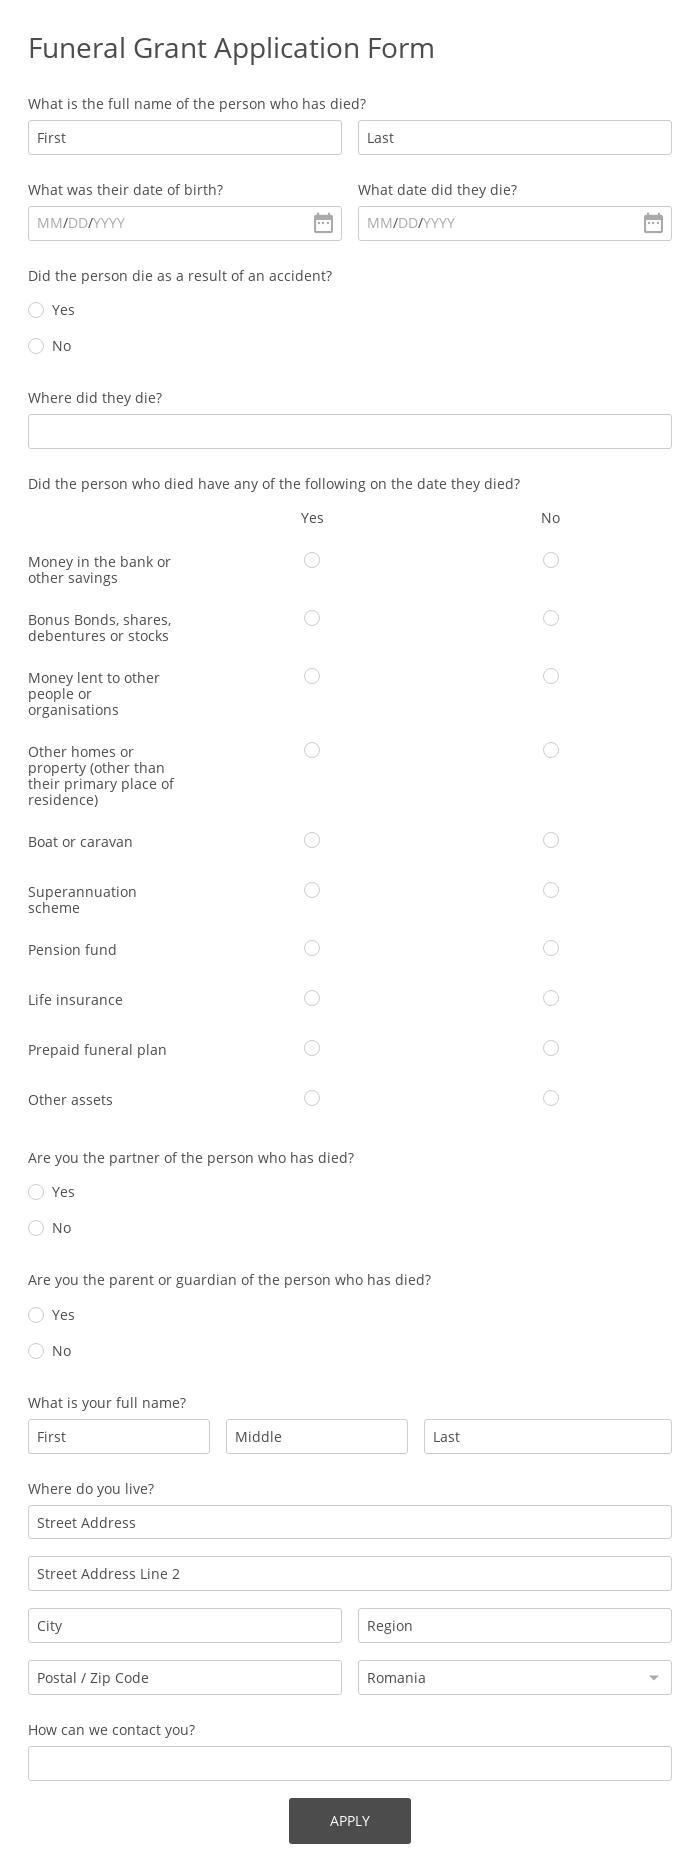 Funeral Grant Application Form